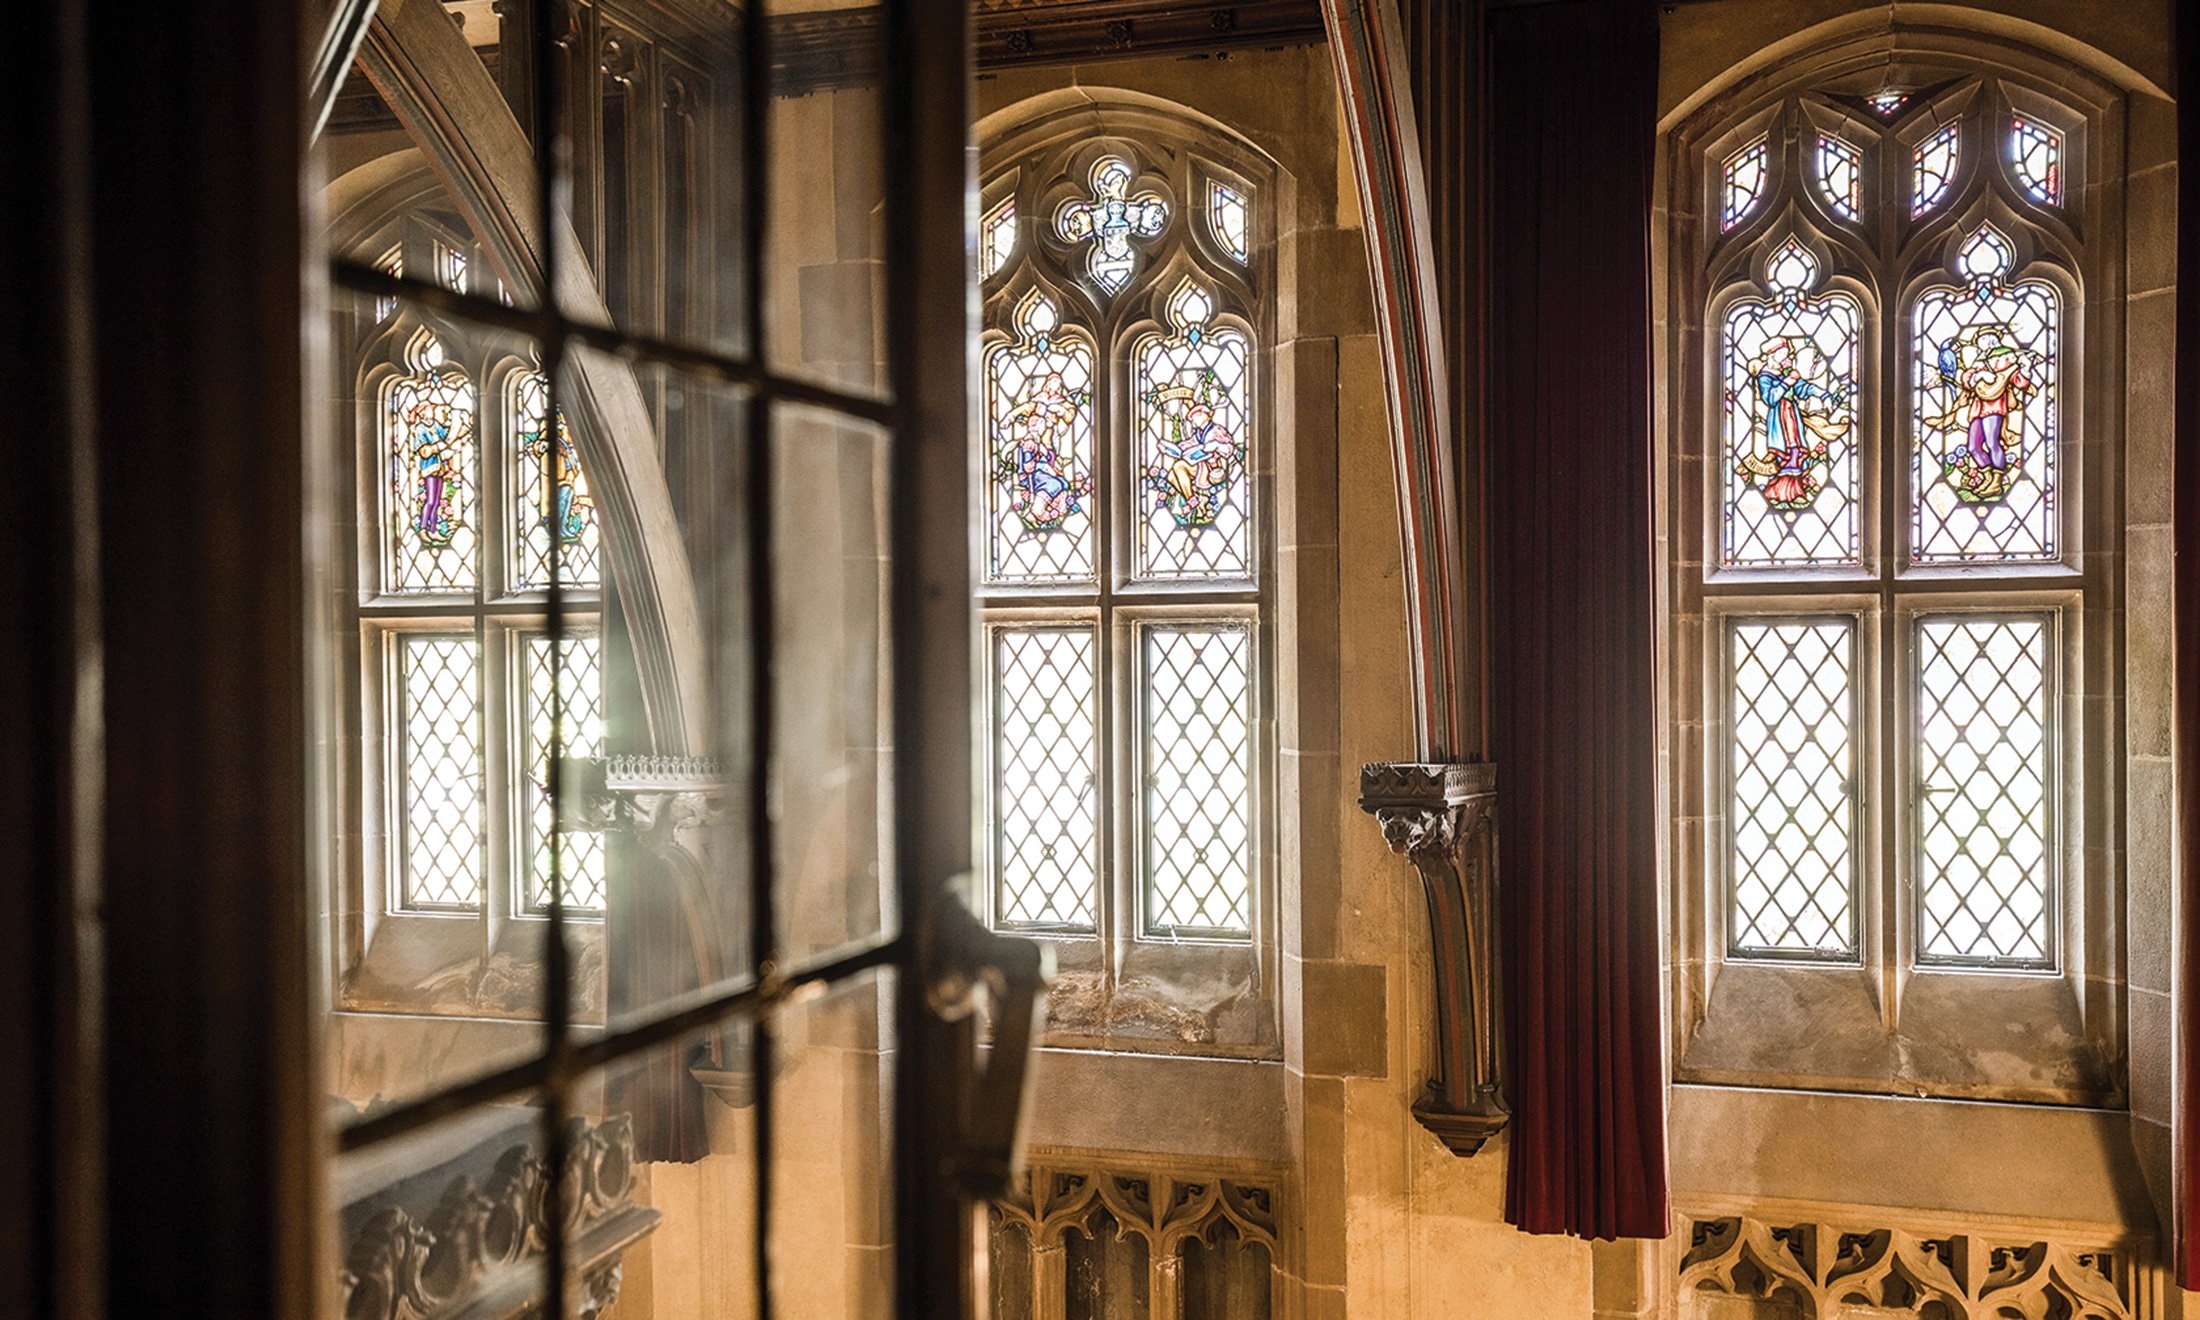 An interior view of the stained glass windows inside Meadow Brook Hall